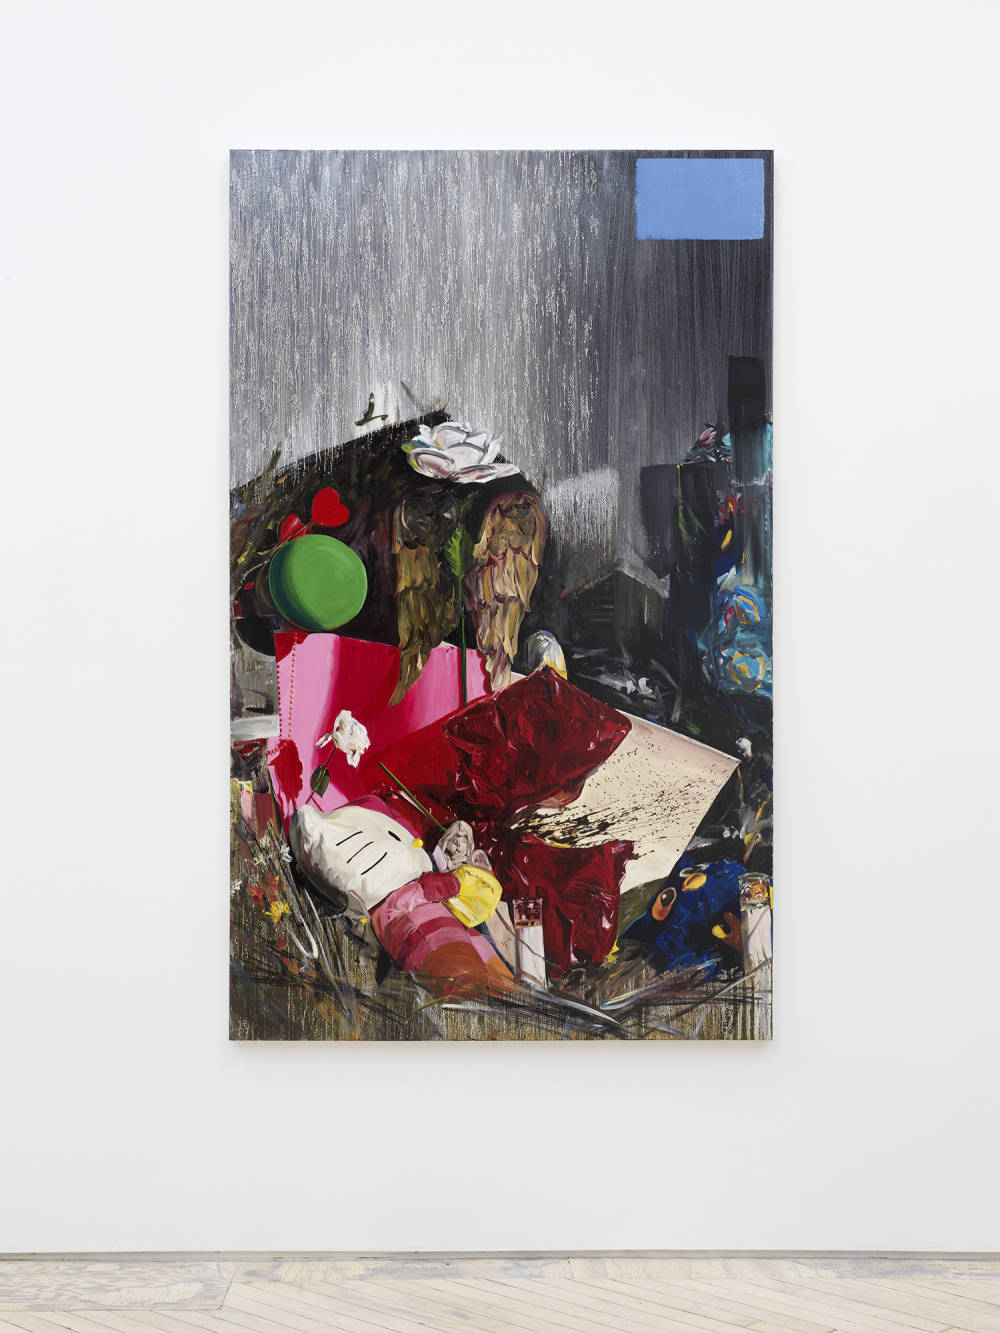 An image of a gestural painting by Tom Holmes that depicts a scene of a roadside memorial with flowers and other items laid on the sidewalk, there is a "Hello Kitty" doll in the foreground.